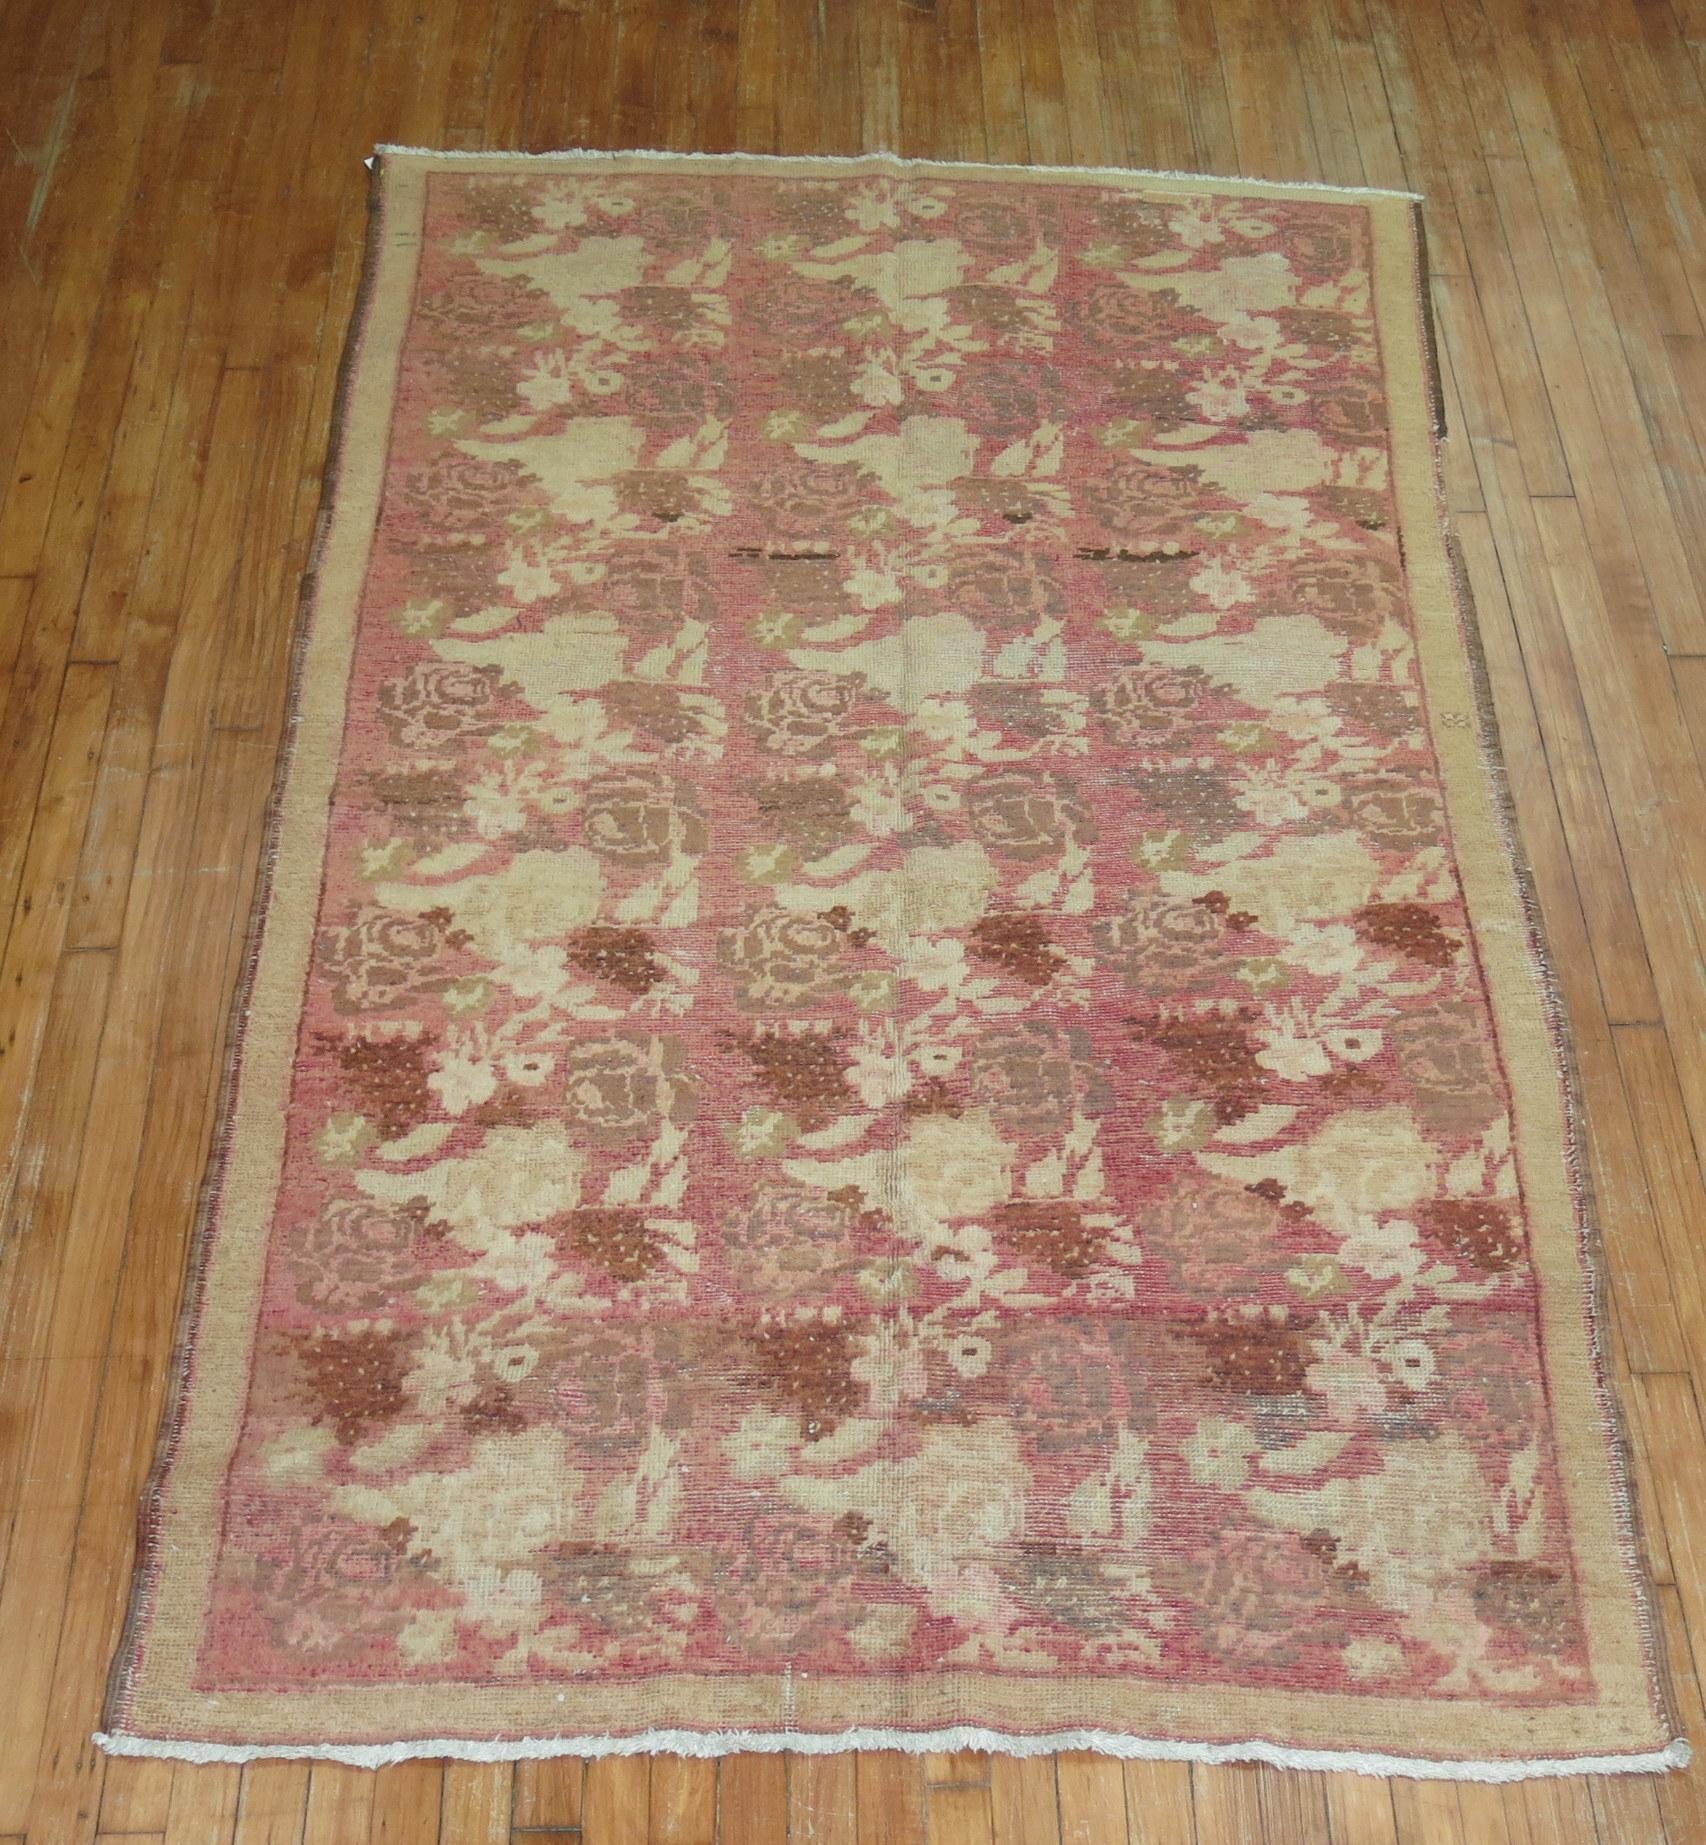 A mid 20th century Russian Karabagh Accent Size rug with brown and beige accents on a pink field

Measures: 4'6'' x 7'8''.